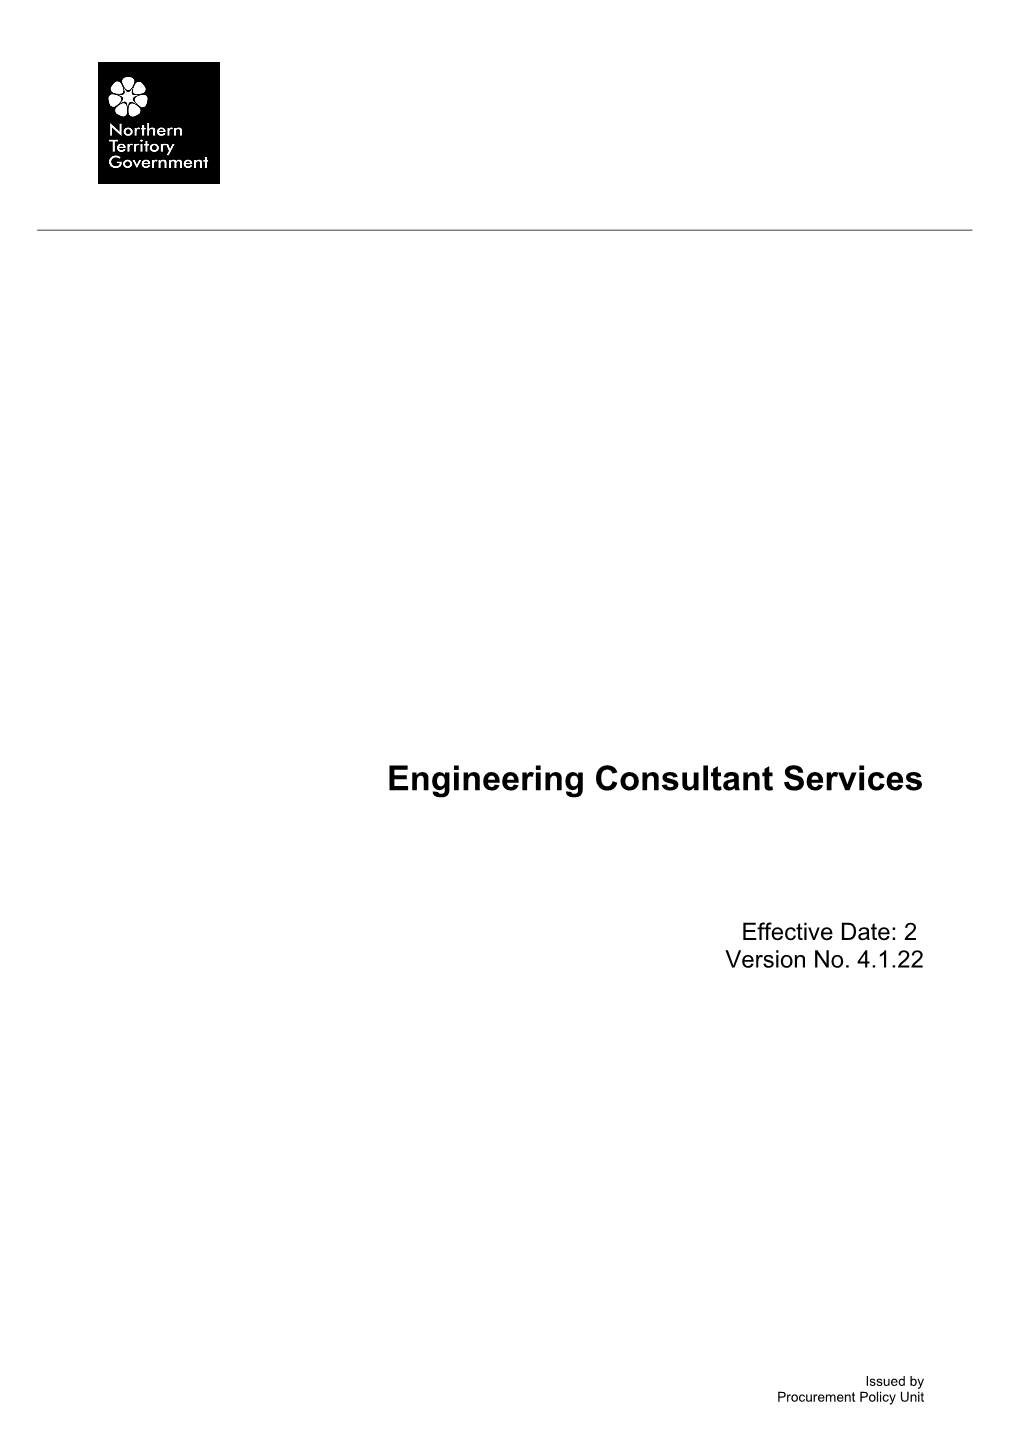 Engineering Consultant Services - V 4.1.22 (2 February 2009)